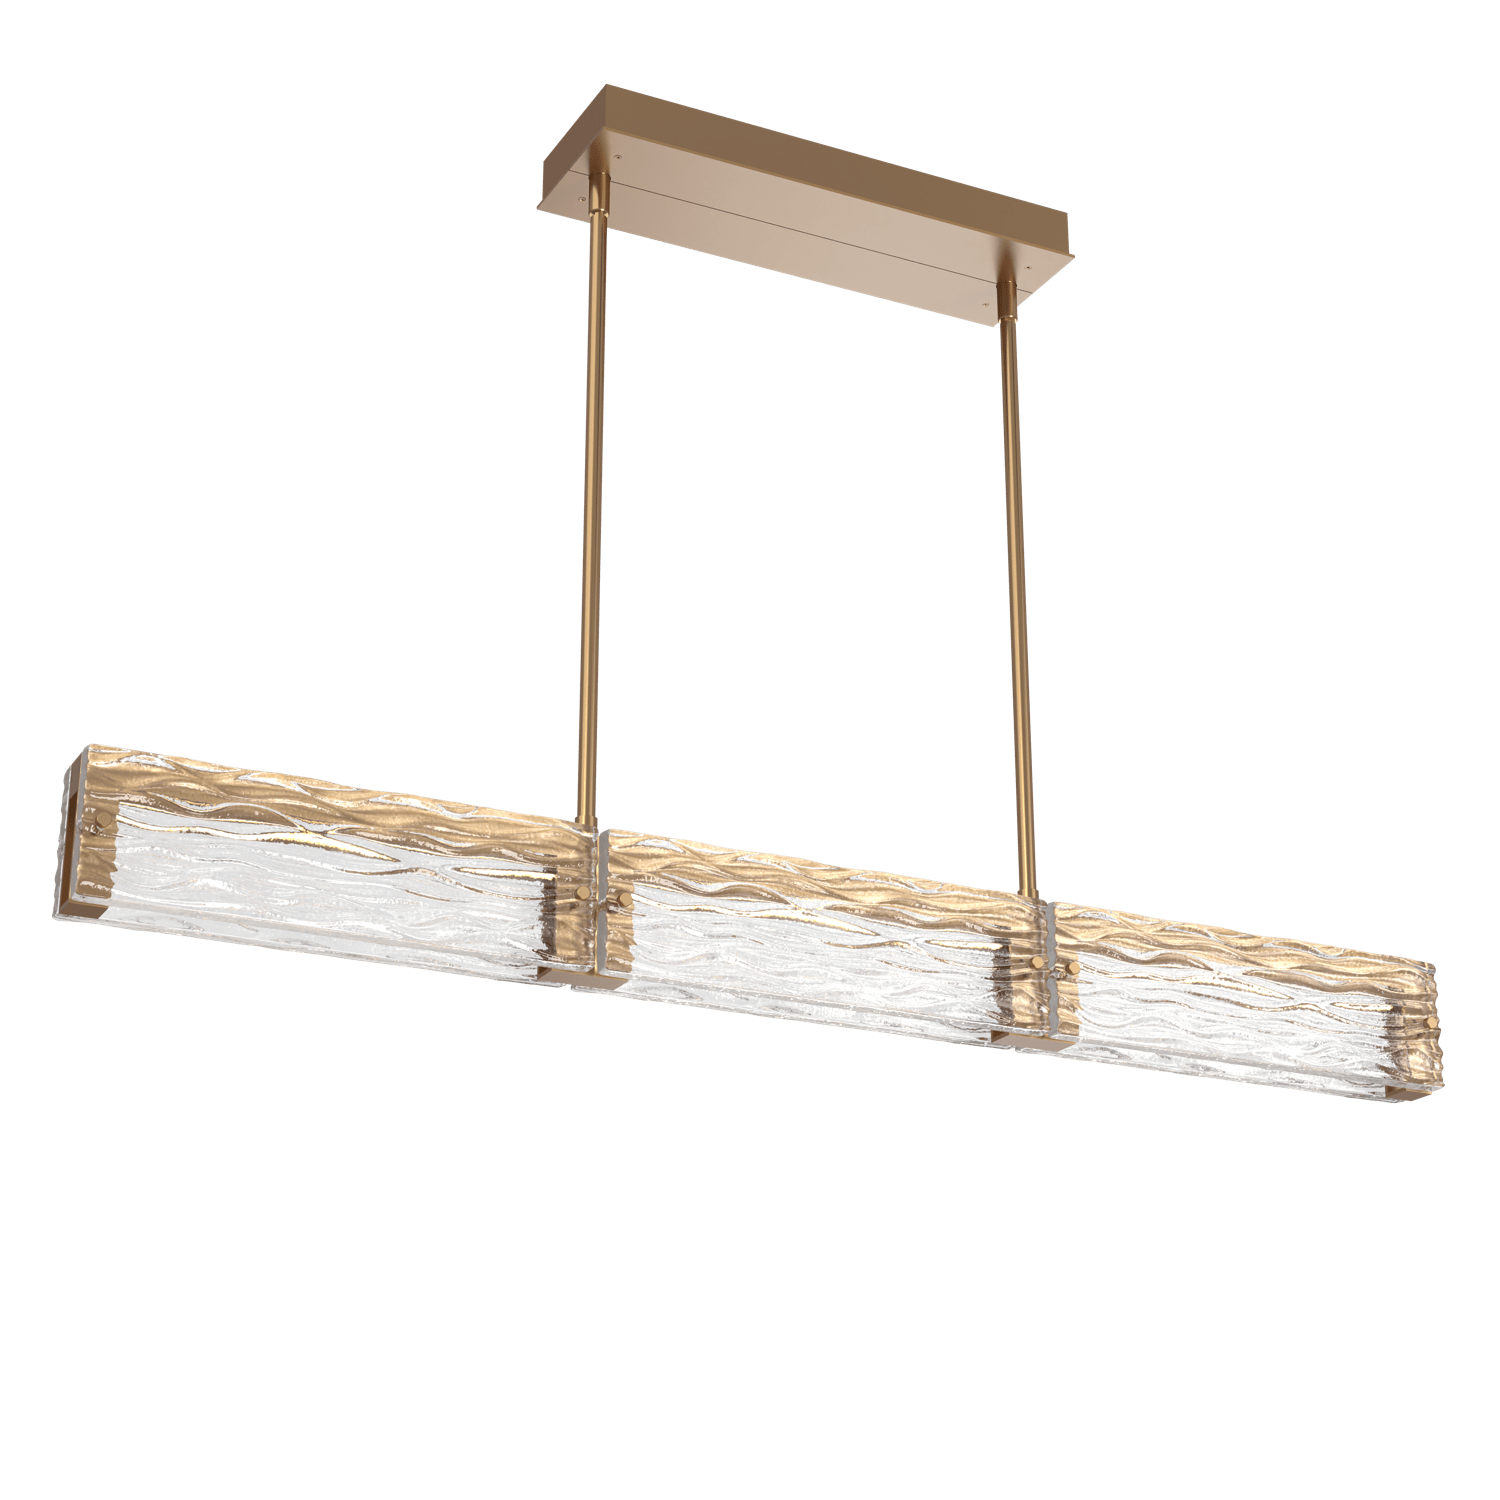 PLB0090-43-NB-TT-Hammerton-Studio-Tabulo-43-inch-linear-chandelier-with-novel-brass-finish-and-clear-tidal-cast-glass-shade-and-LED-lamping